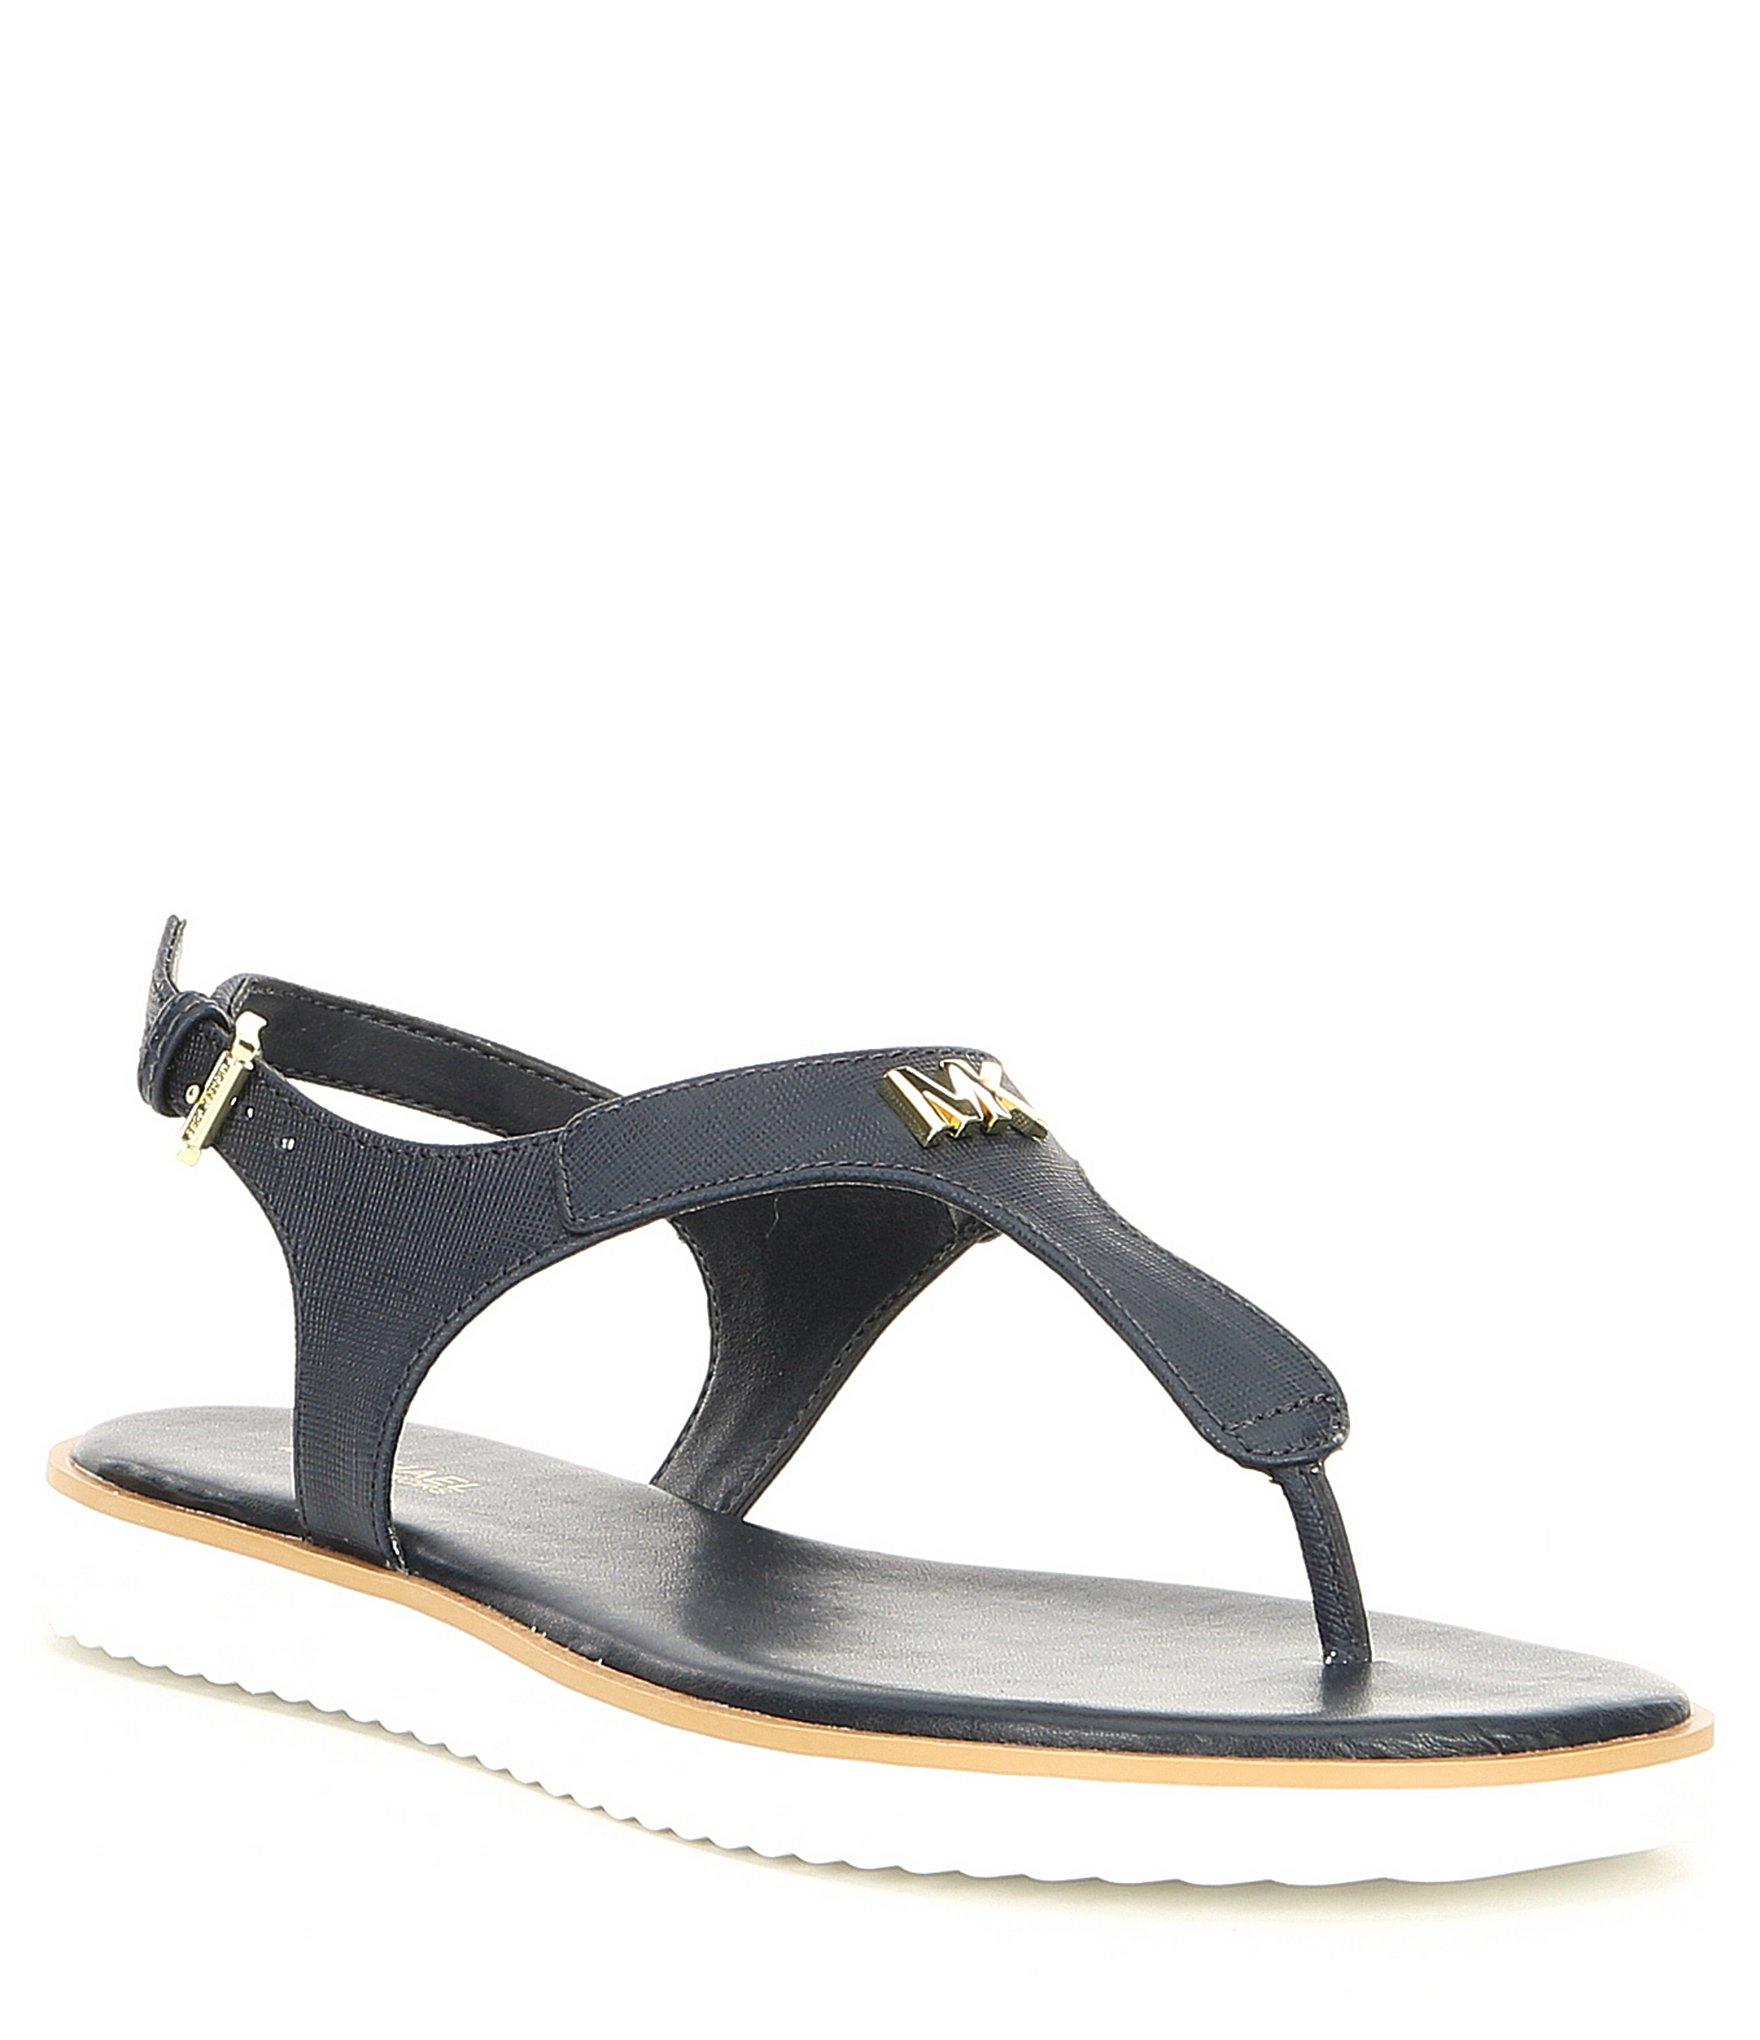 Lyst - MICHAEL Michael Kors Brady Saffiano Leather Thong Sandals in Blue